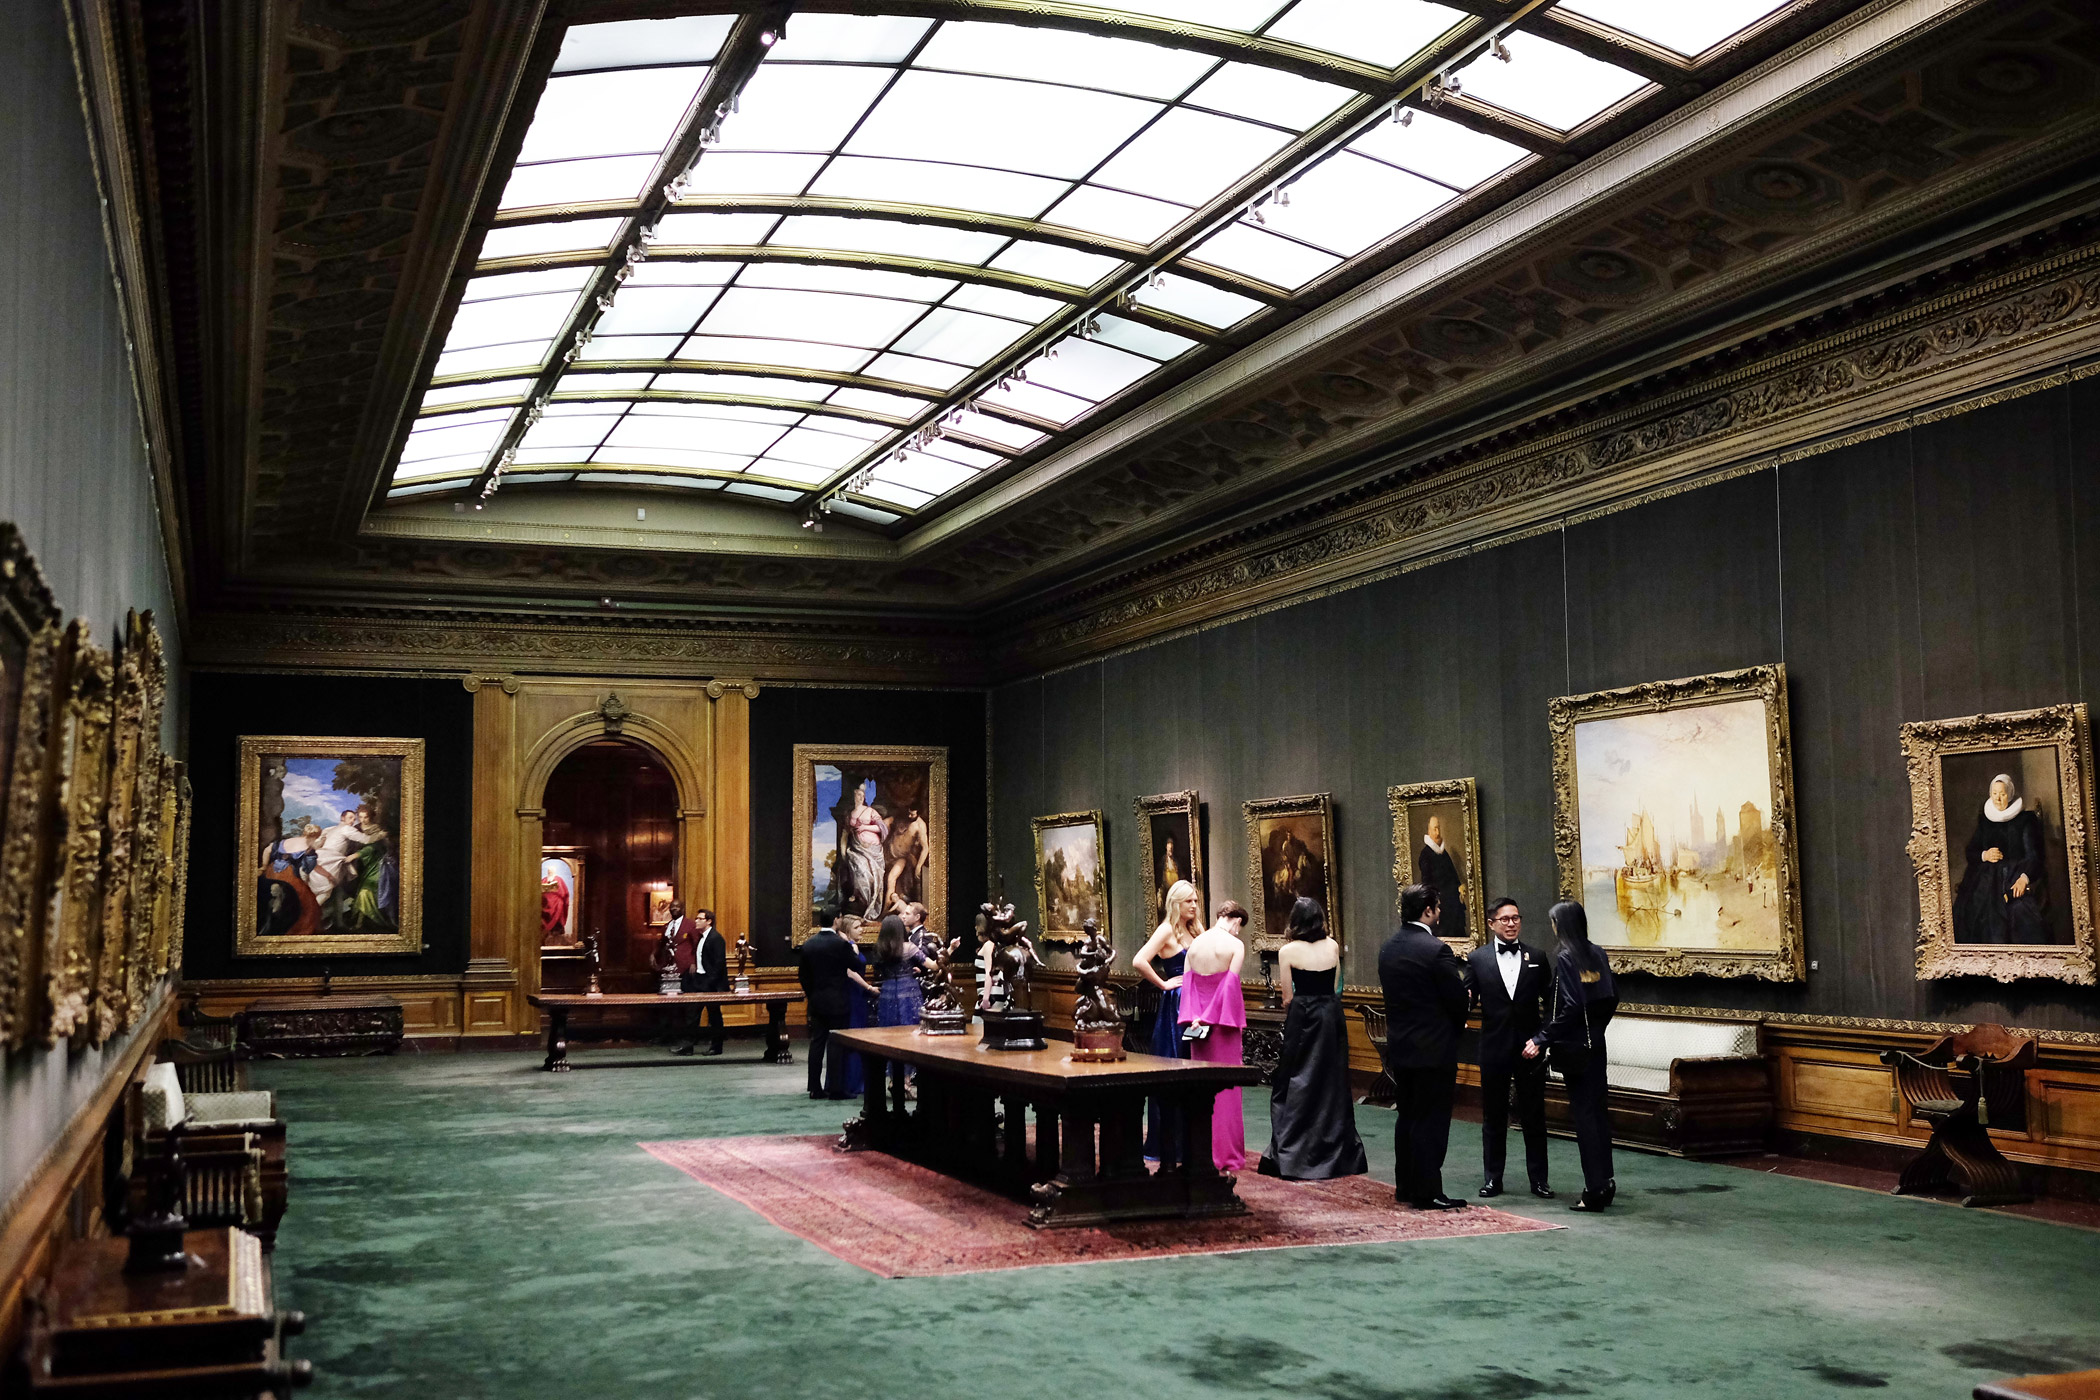 The Frick Collection, New York Industrialist Henry Clay Frick willed his Gilded Age mansion and its contents—art, furniture and decoration— to the public. The permanent collection, many arranged to Frick's design, contains master paintings while temporary exhibitions rotate alongside.